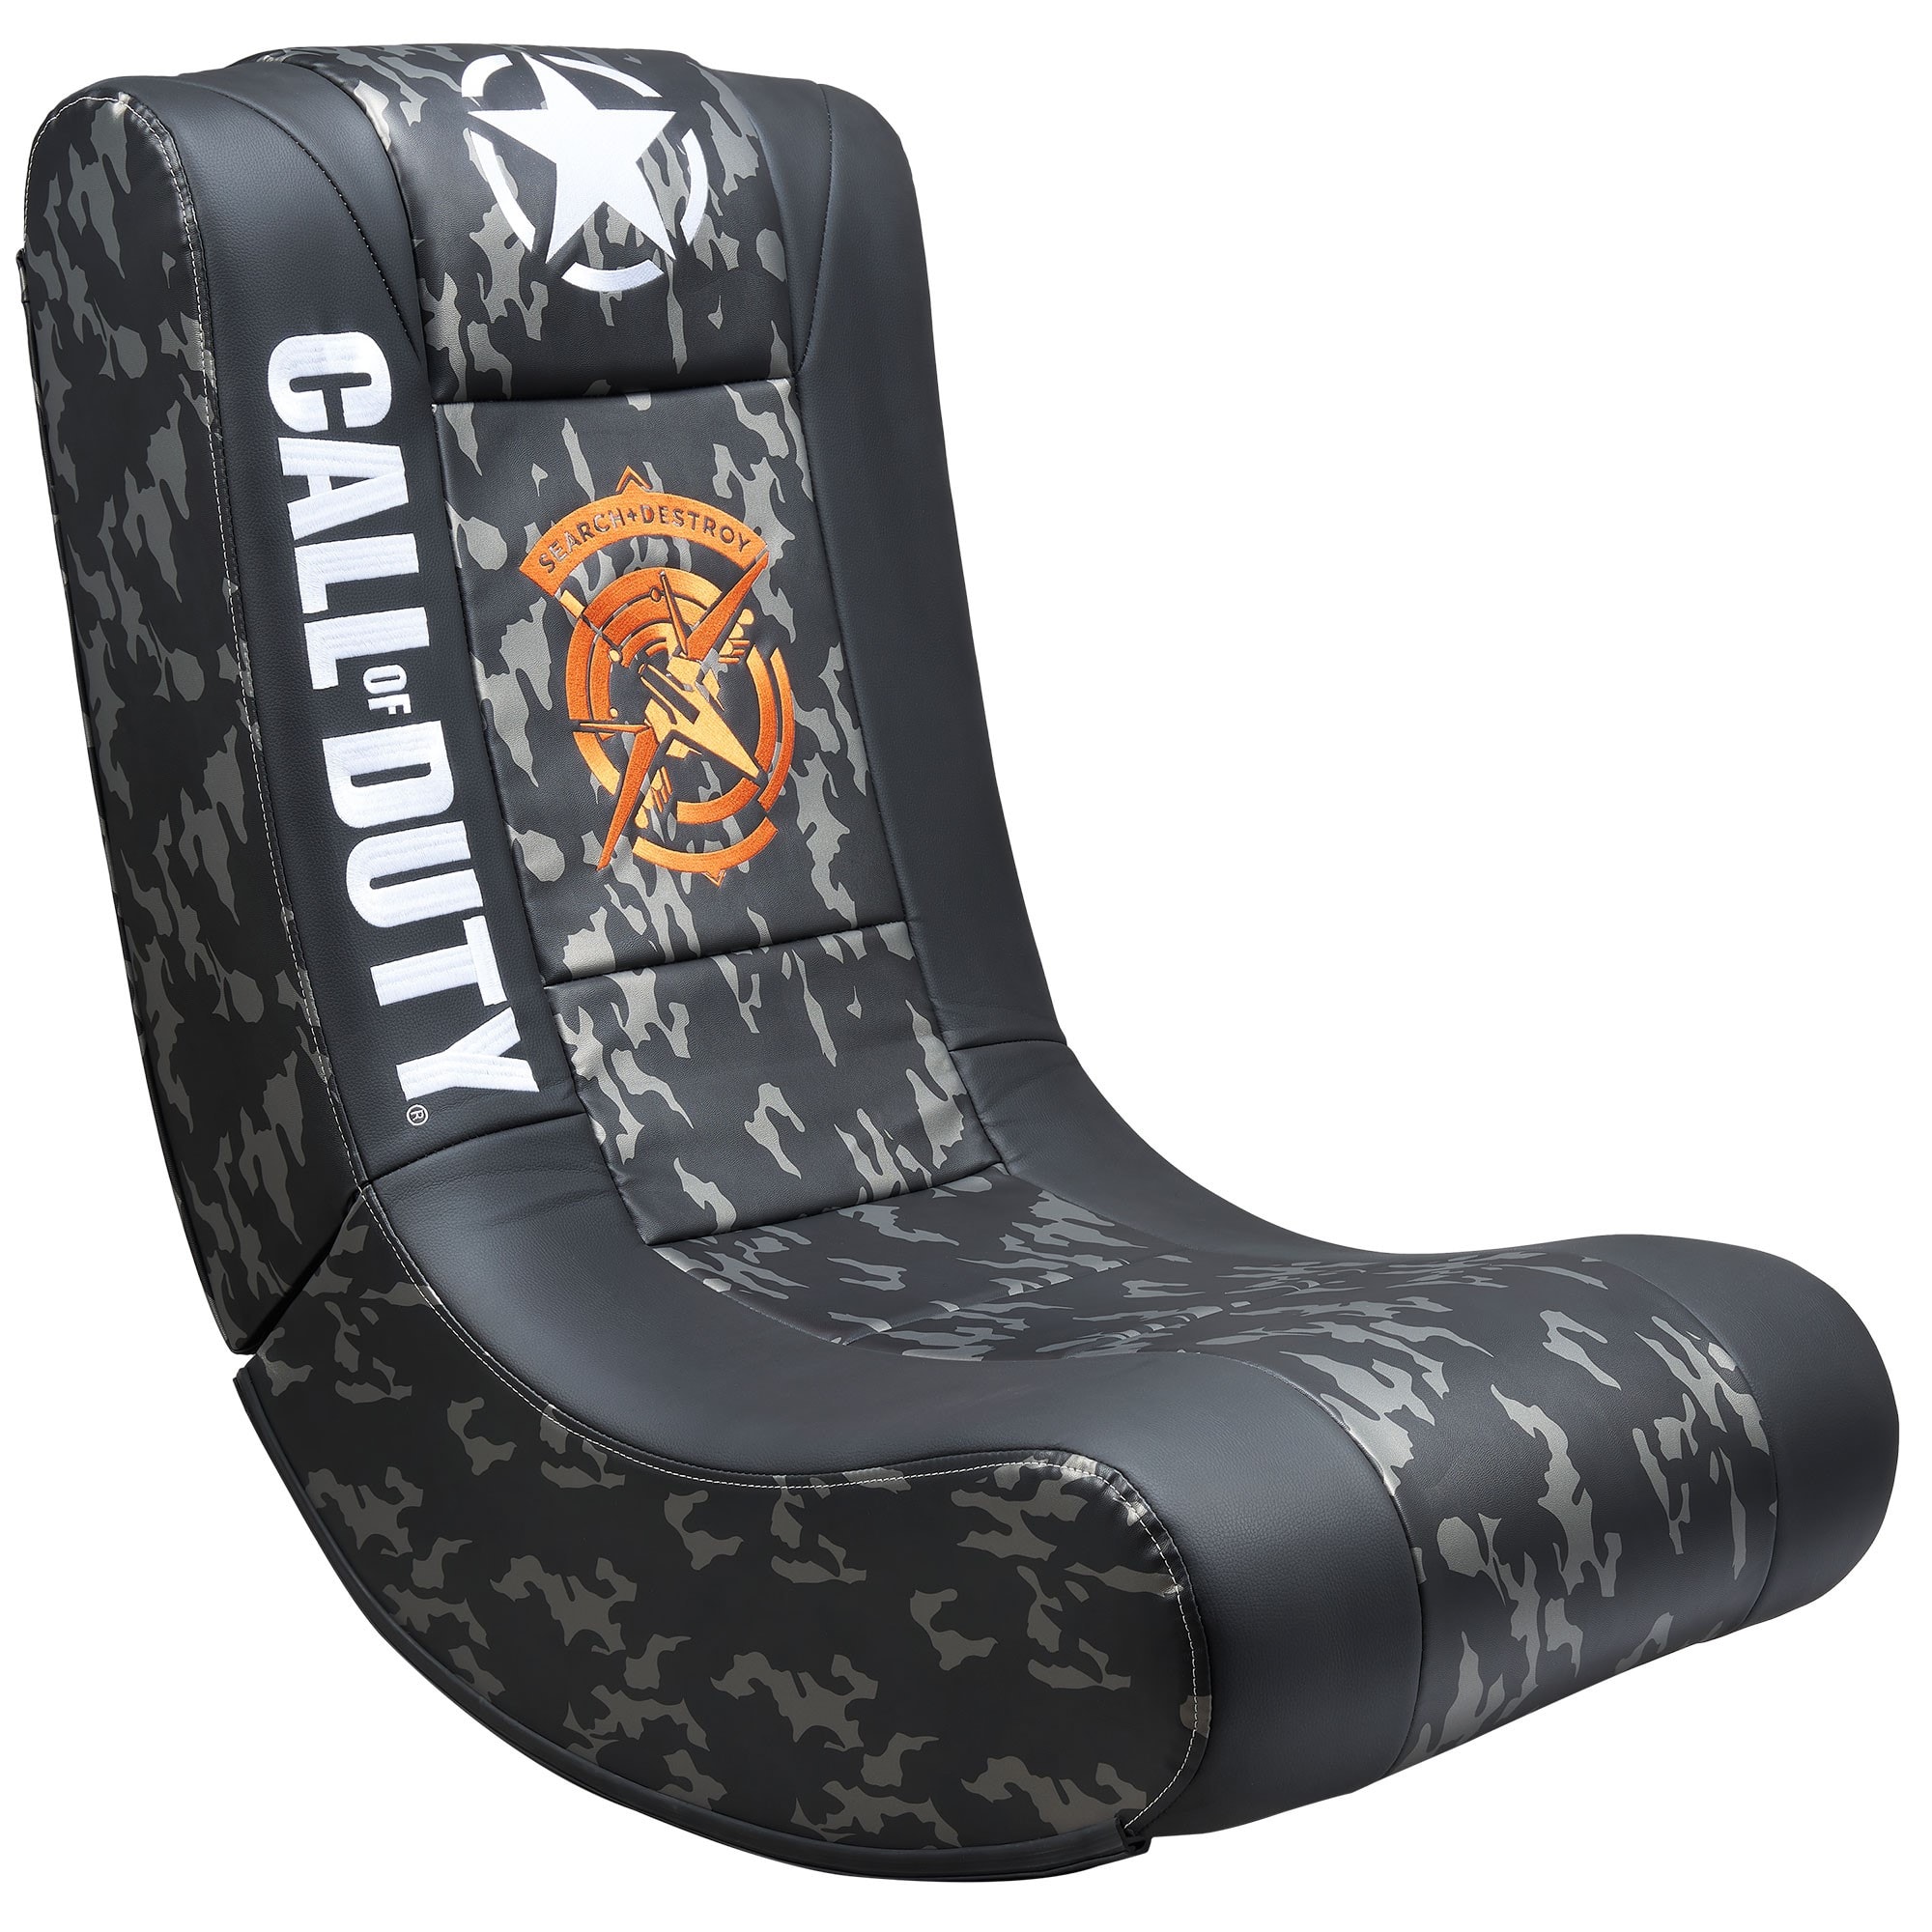 Siège fauteuil gamer rock'n seat - cod call of duty SUBSONIC Pas